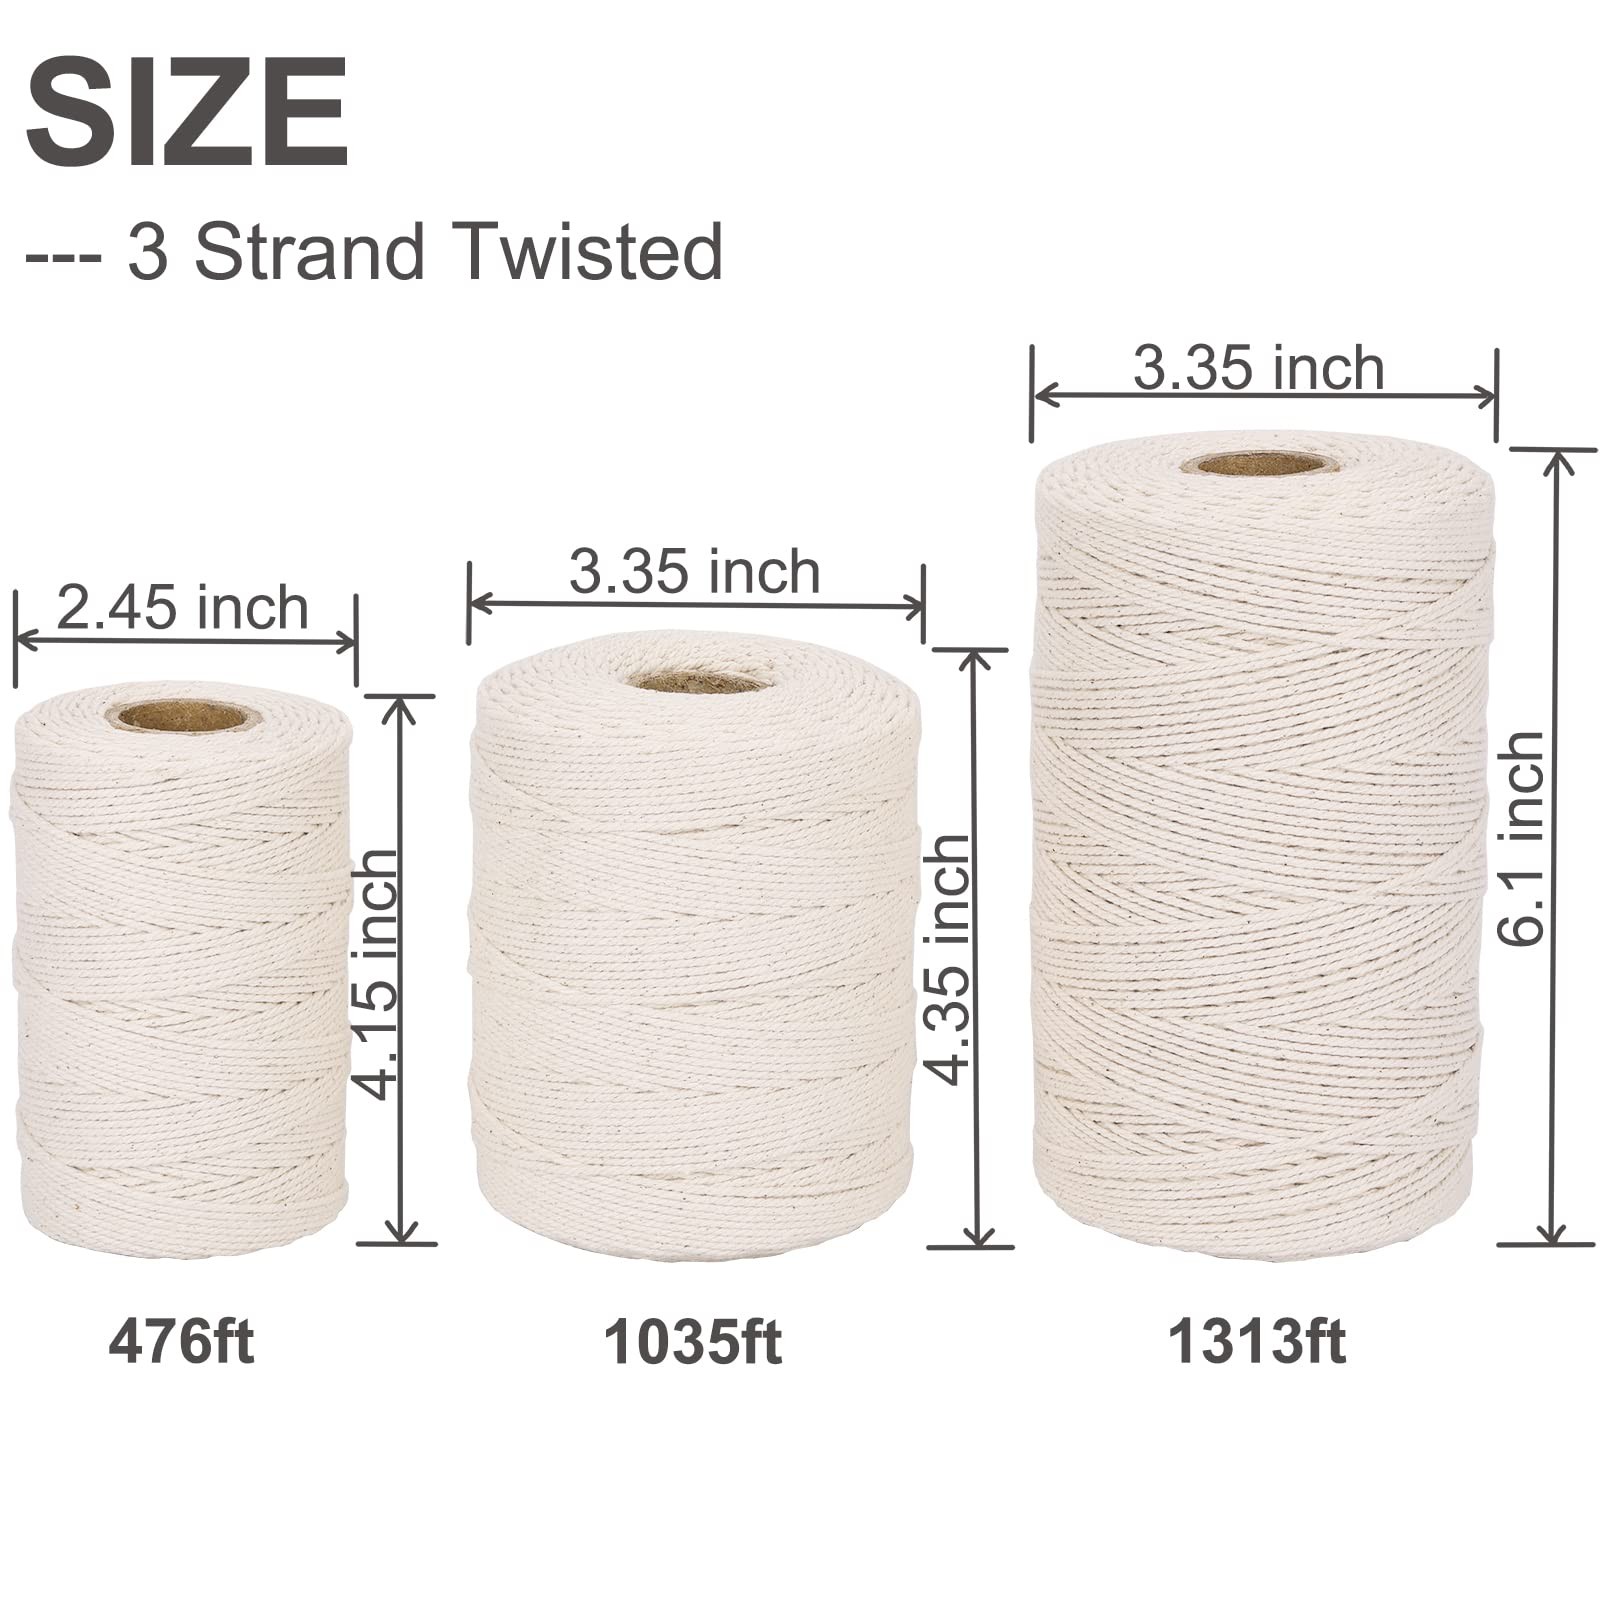 XKDOUS 1035ft Butchers Twine, 100% Cotton Food Safe Cooking Twine Kitchen  Twine String, 2mm Natural White Butcher Twine for Meat and Roasting,  Trussing Poultry, Bakes Twine & Crafting: le migliori offerte e